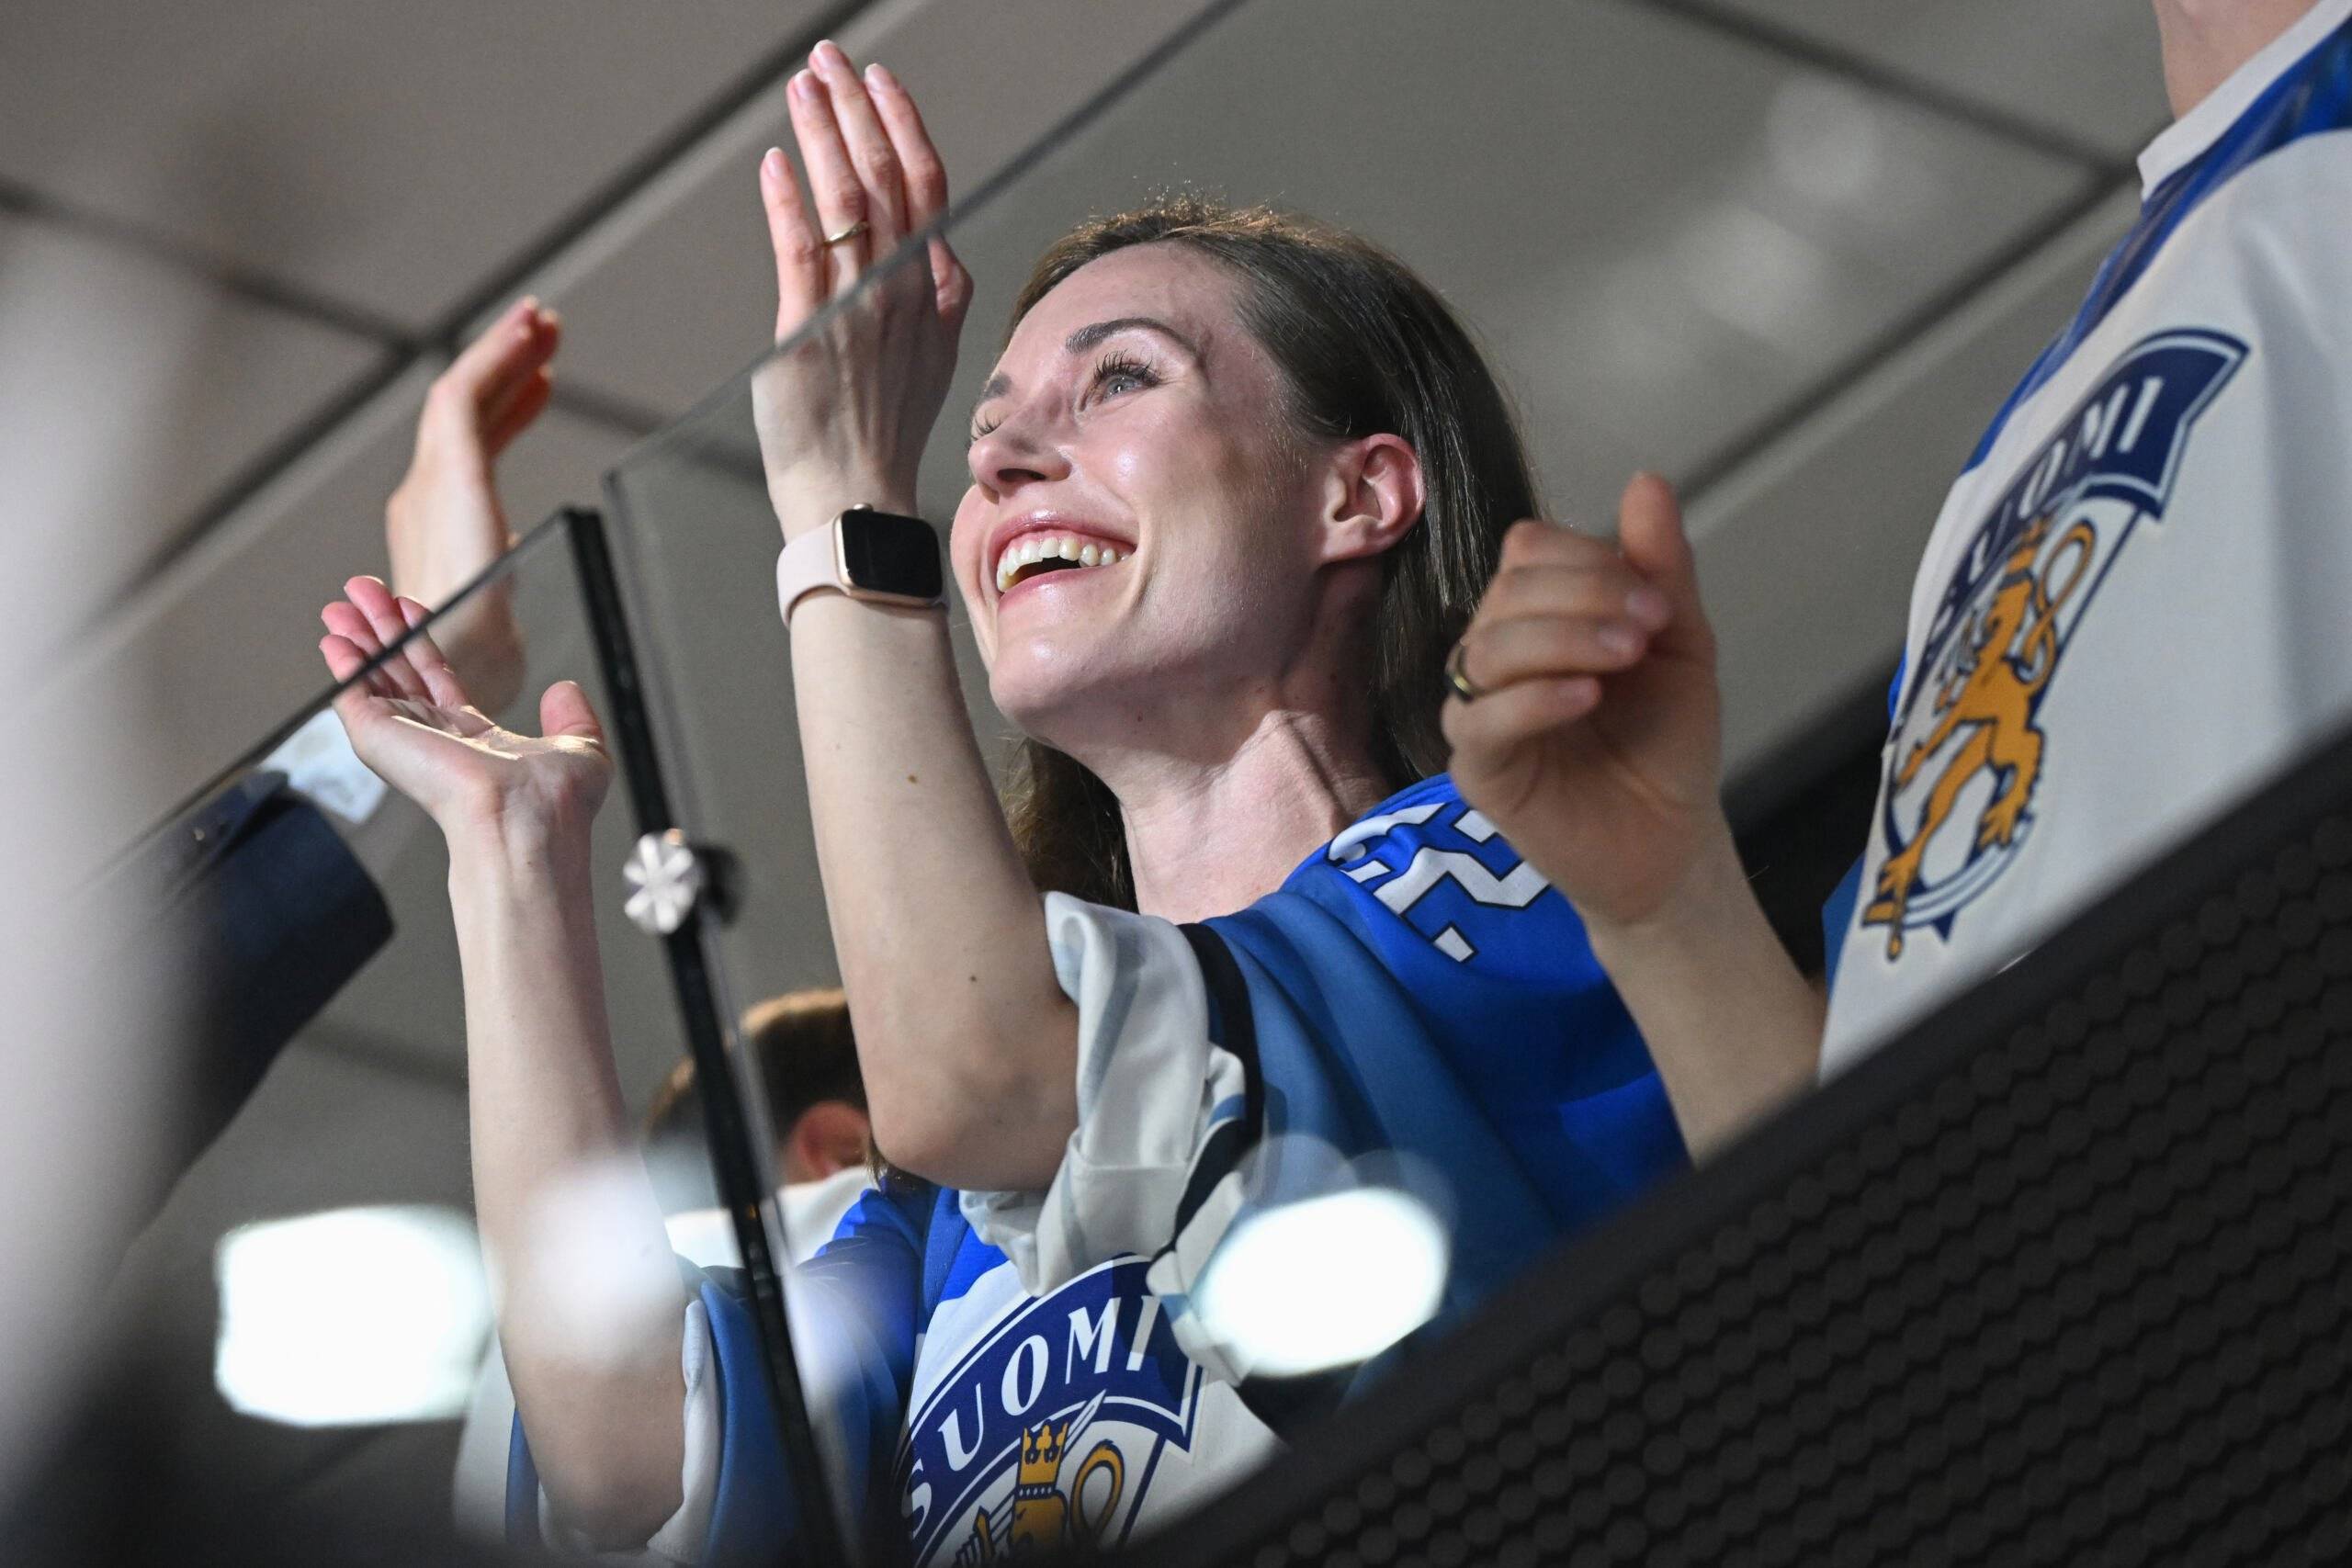 Finnish Prime Minister Sanna Marin celebrates a goal during the IIHF Ice Hockey World Championships final match between Finland and Canada in Tampere, Finland, on May 29, 2022. (Photo by Jonathan NACKSTRAND / AFP)